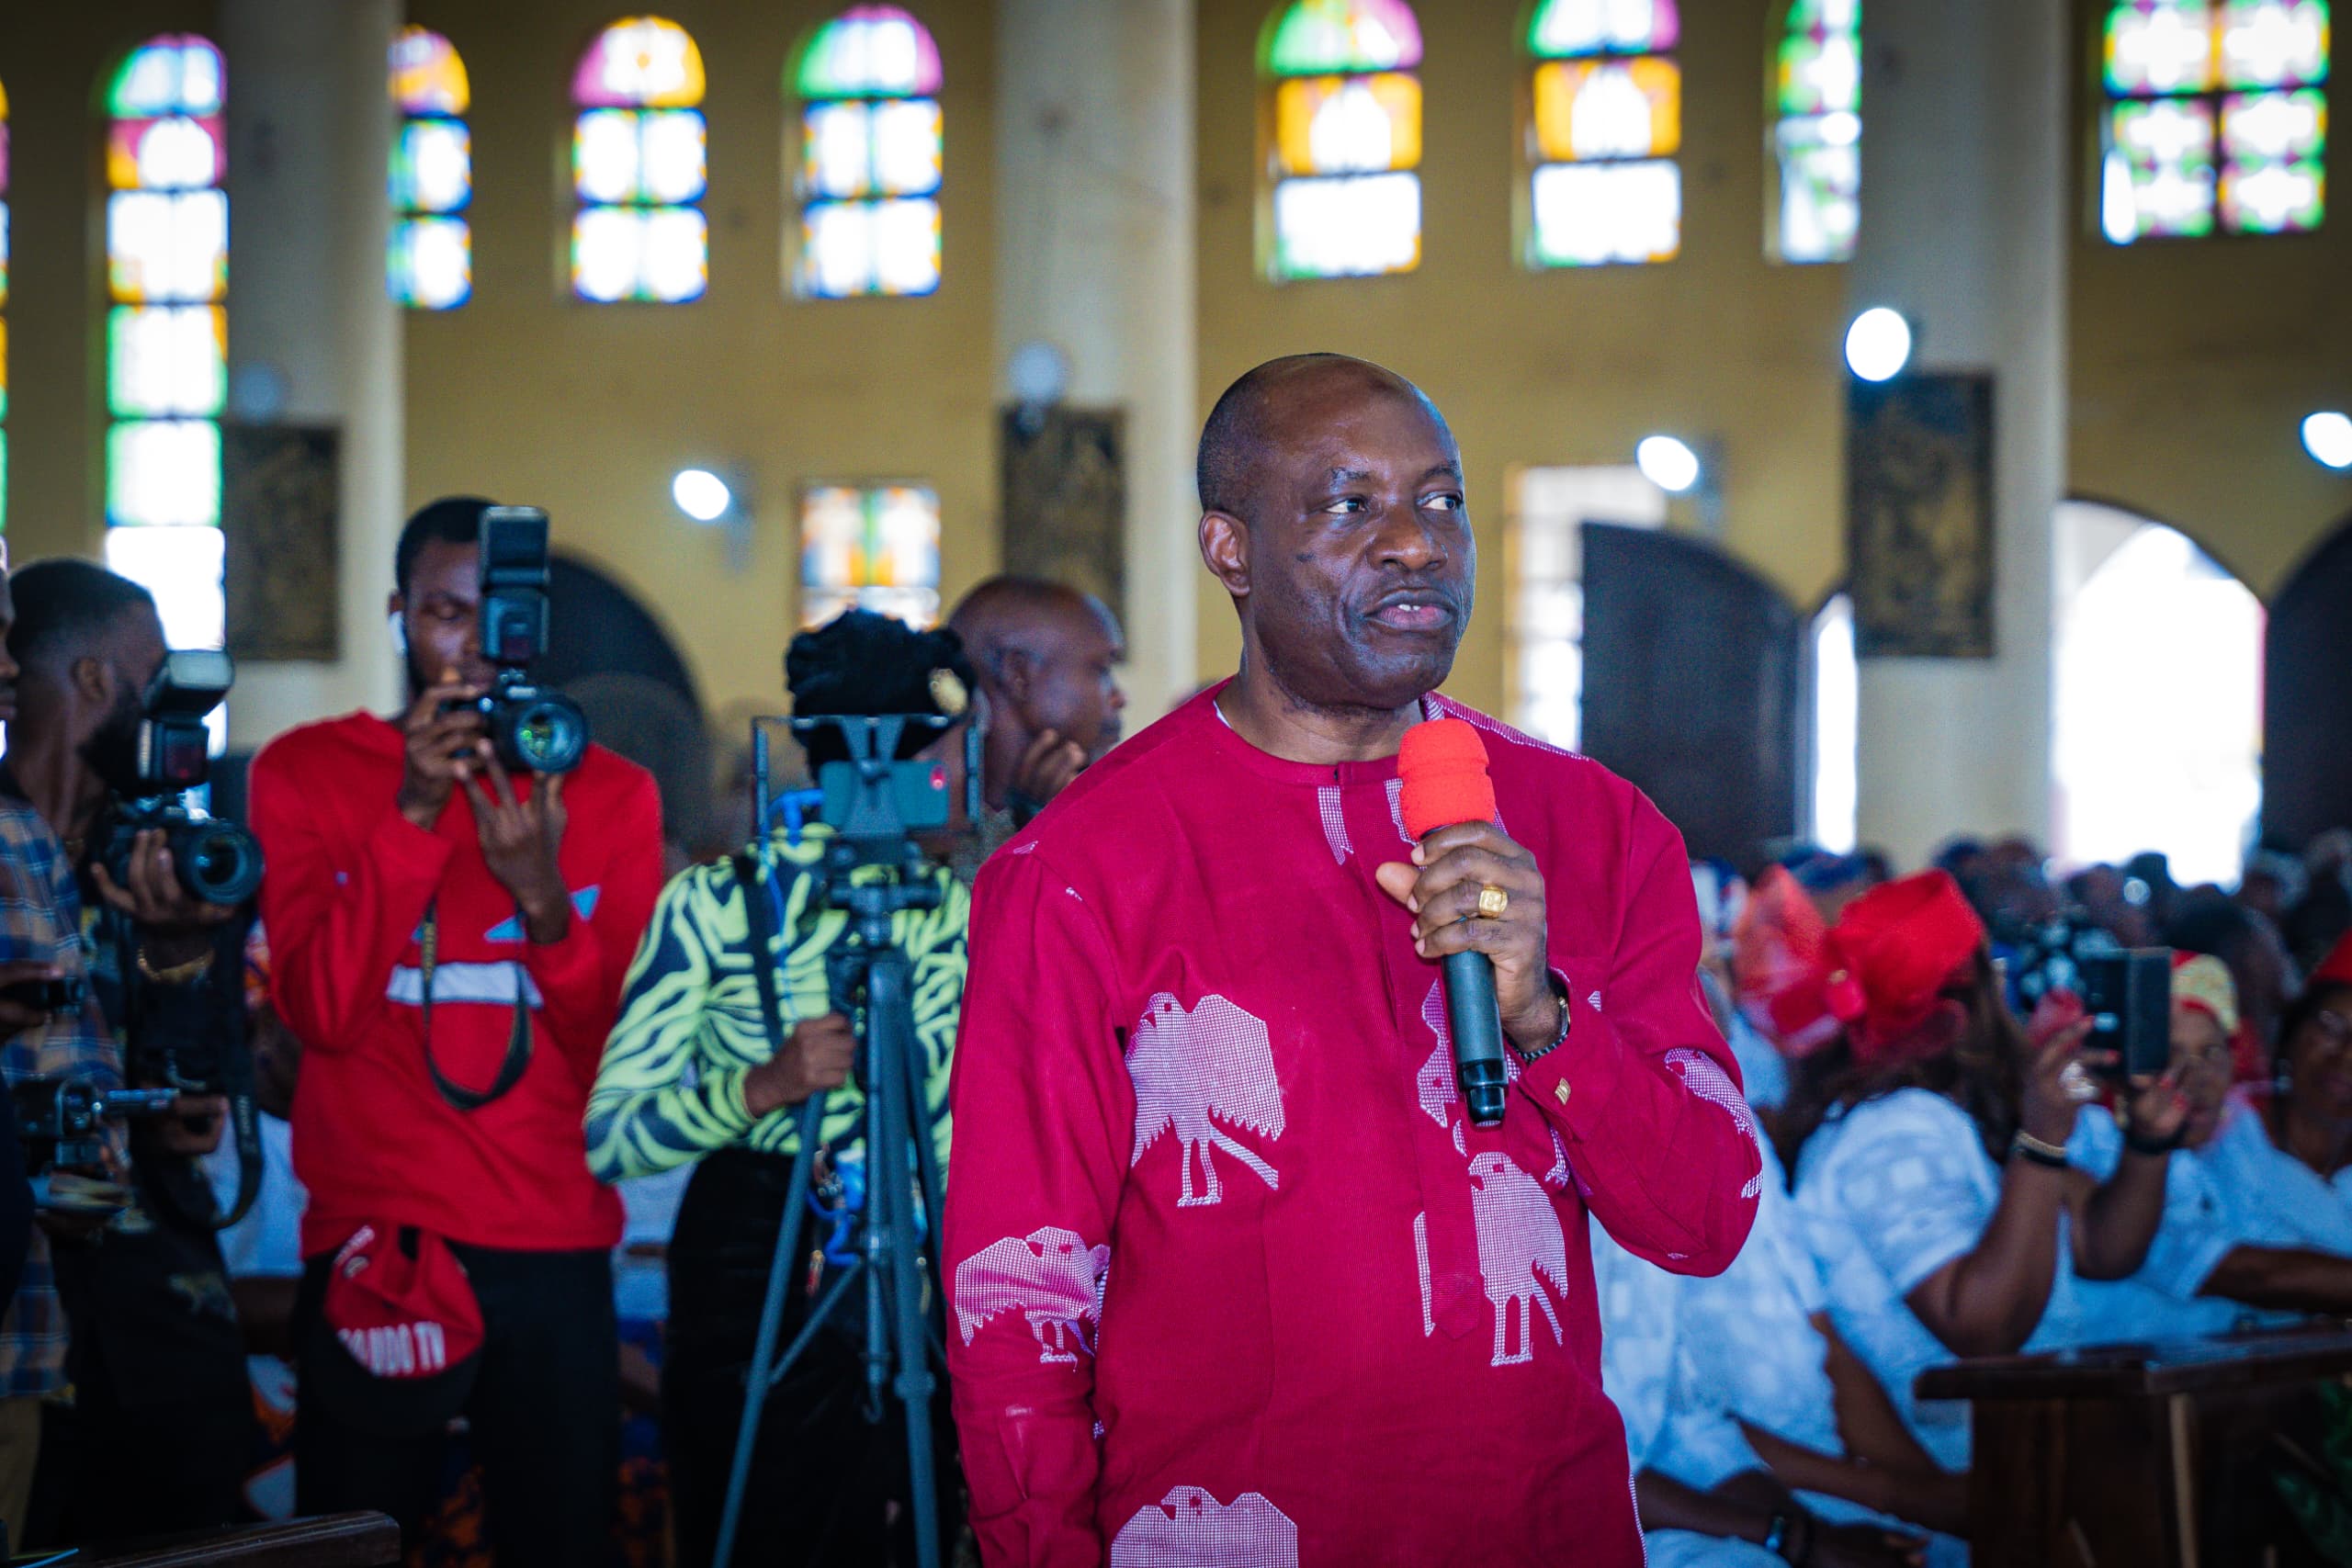 Soludo Mourns Rev. Fr . Stephen Chukwujekwu, Calls For Law And Order, Chieftaincy Reform At Funeral Mass